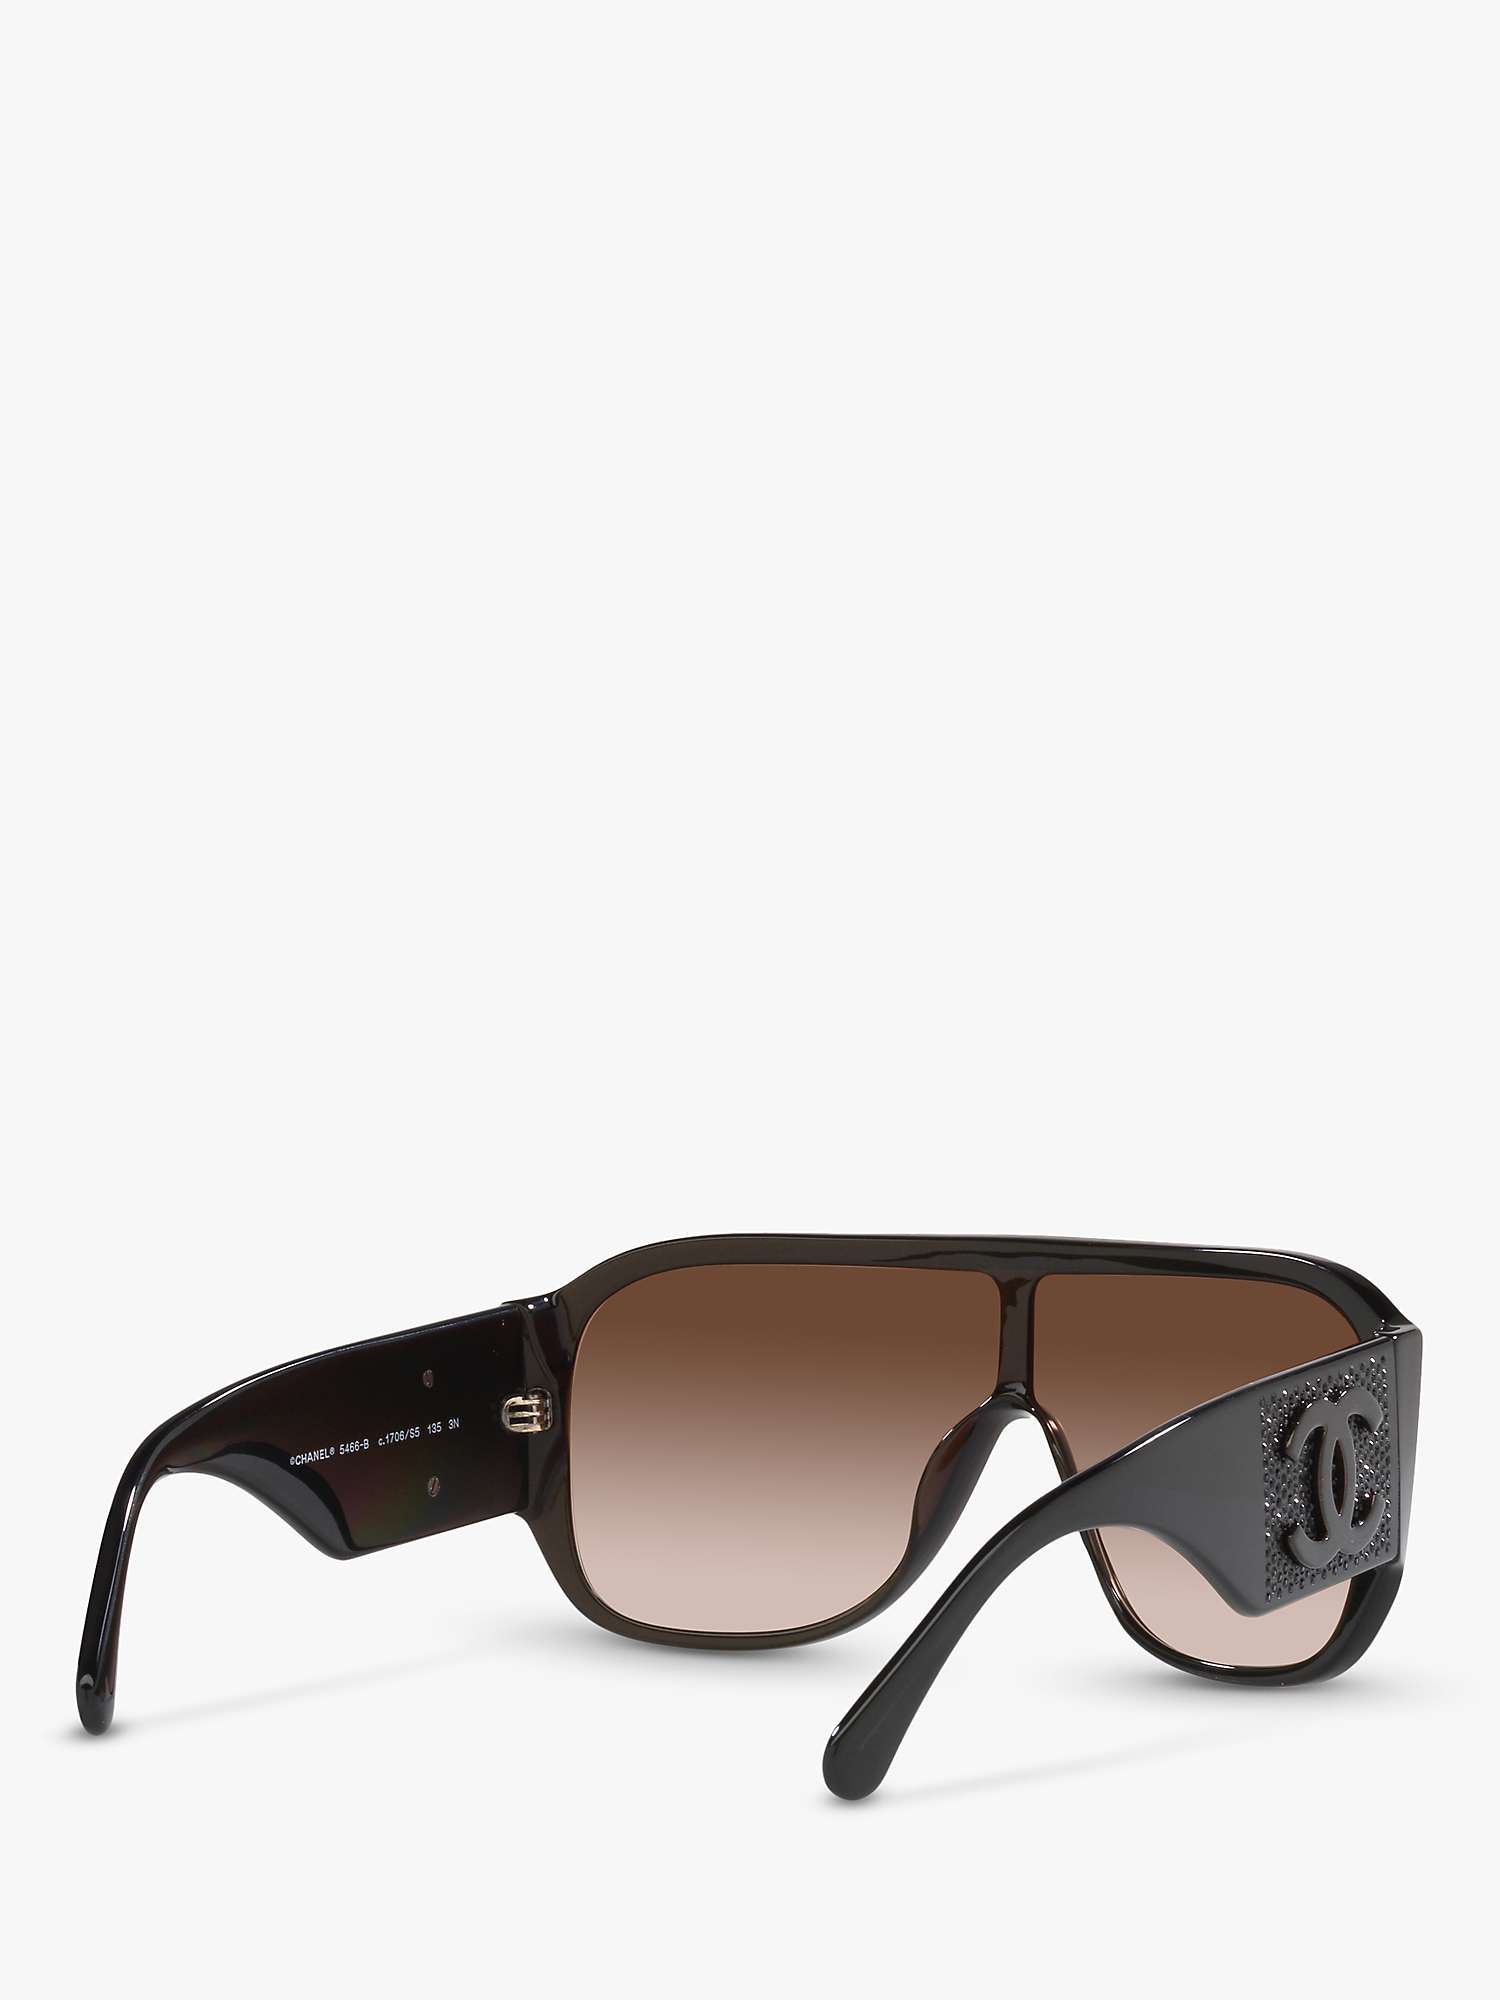 Buy CHANEL Pillow Sunglasses CH5466B Brown/Brown Gradient Online at johnlewis.com